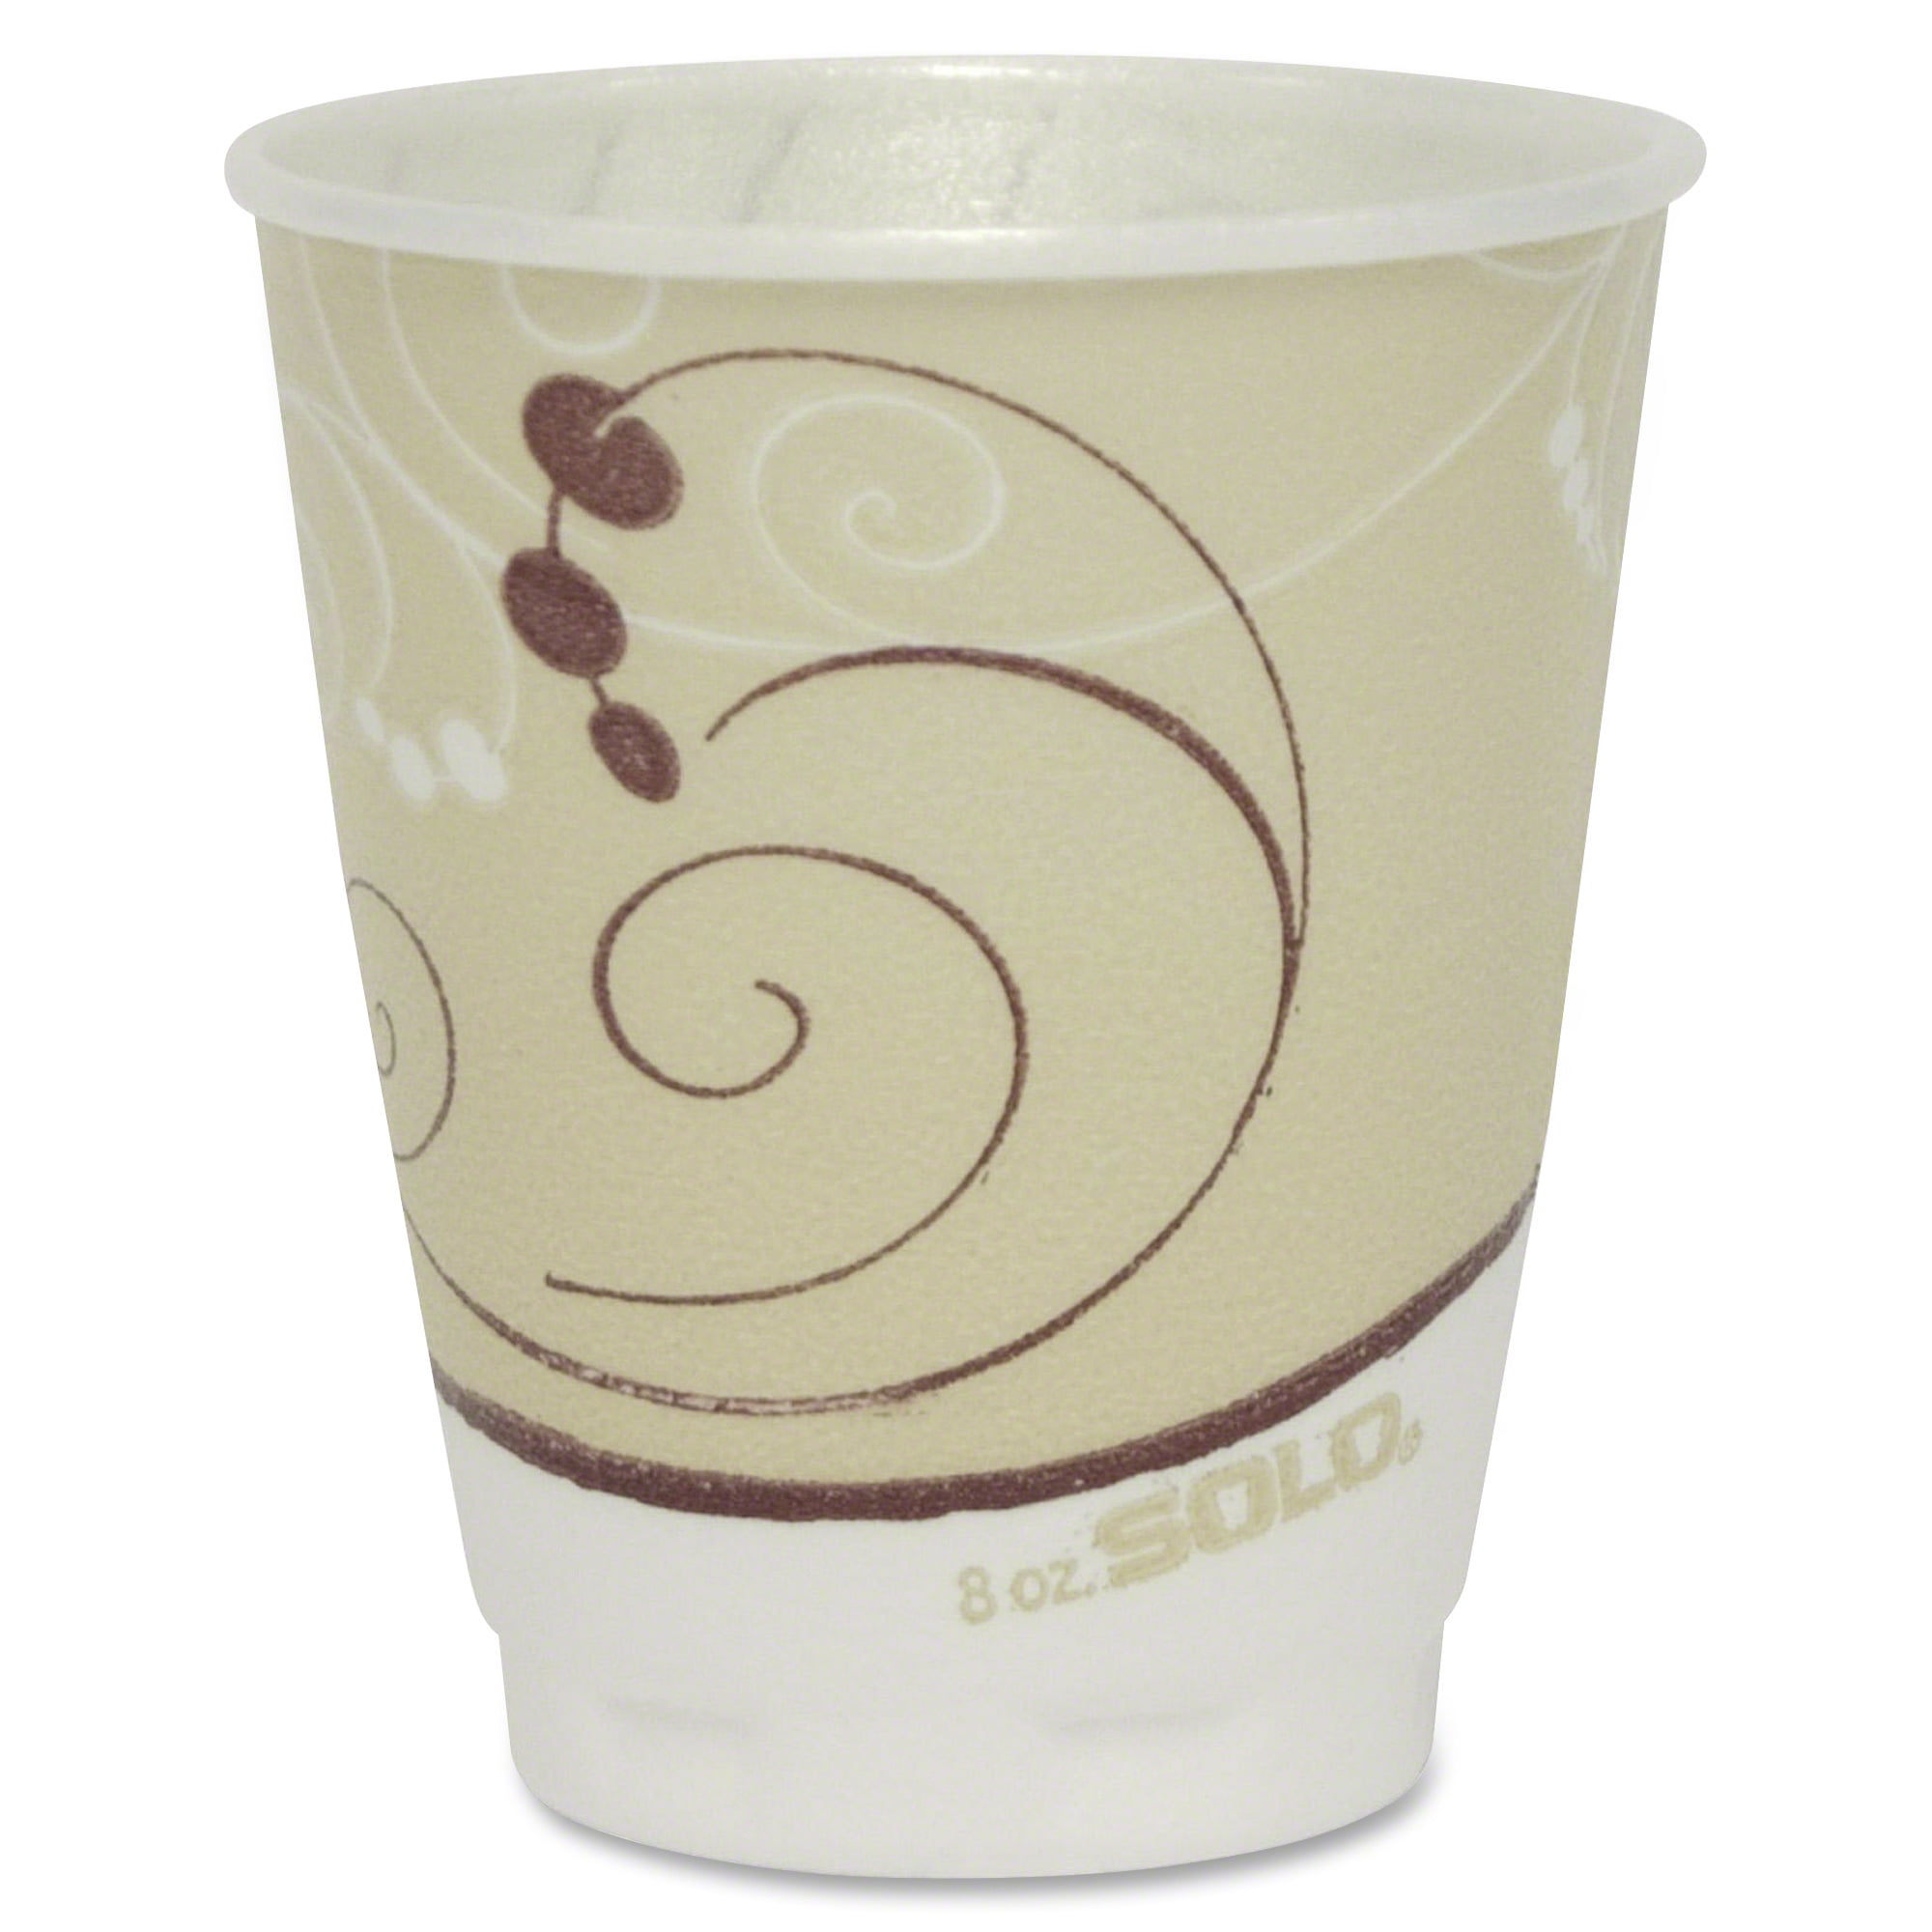 SOLO Cup Company Symphony Design Trophy Foam Hot/Cold Drink Cups 8oz Beige 100 